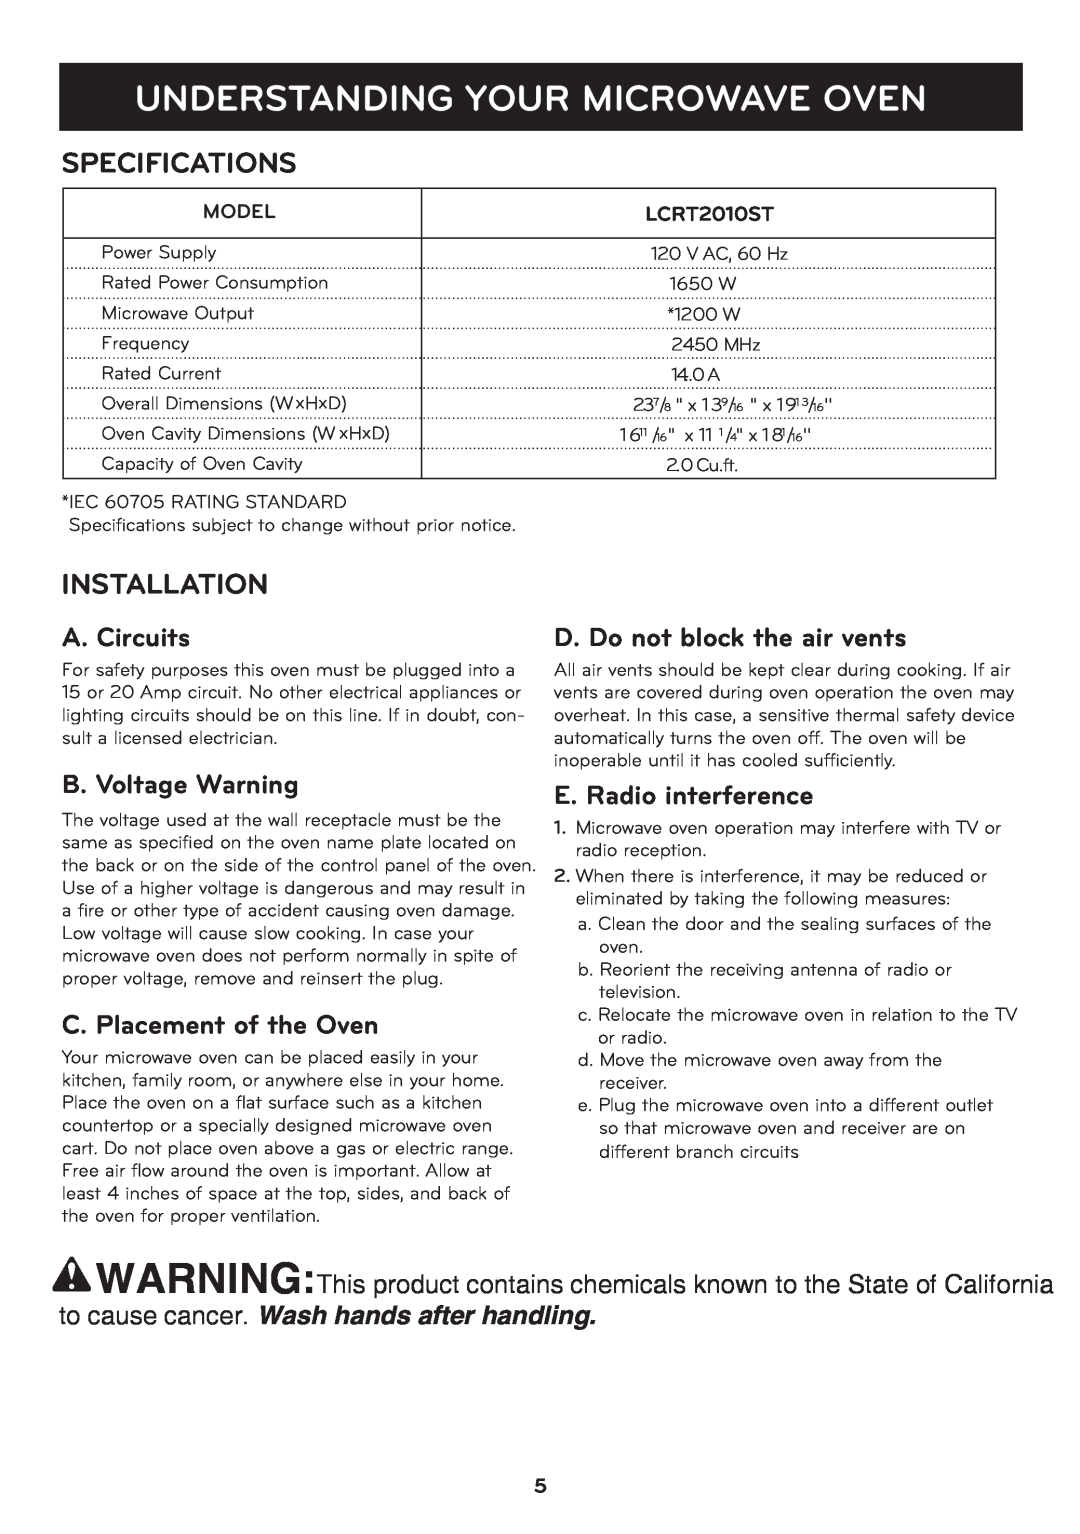 LG Electronics LCRT2010ST Understanding Your Microwave Oven, Specifications, Installation, A. Circuits, B. Voltage Warning 